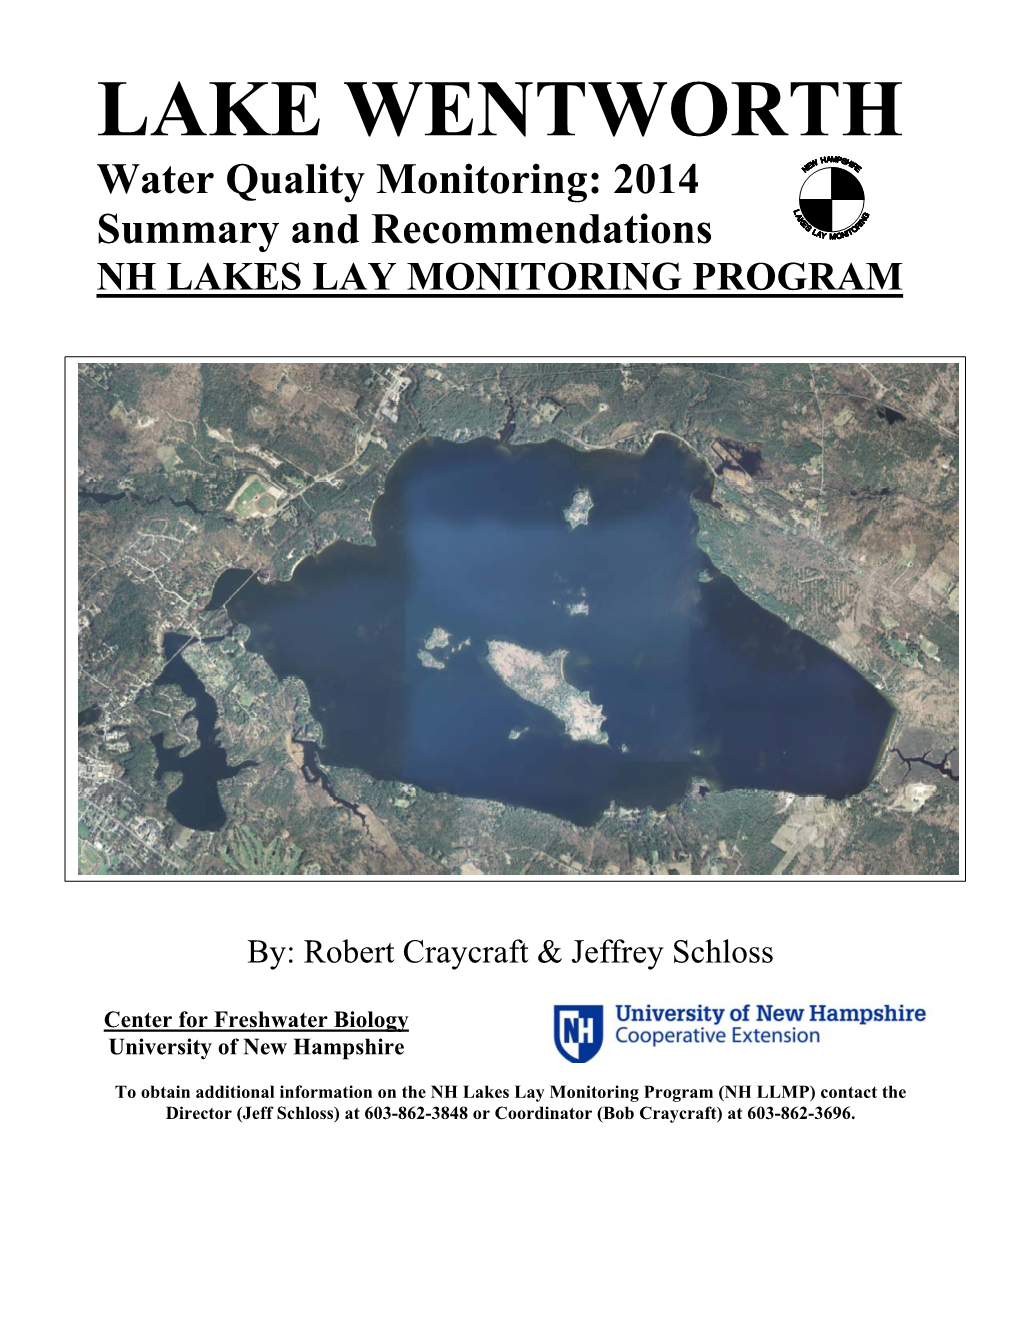 LAKE WENTWORTH Water Quality Monitoring: 2014 Summary and Recommendations NH LAKES LAY MONITORING PROGRAM